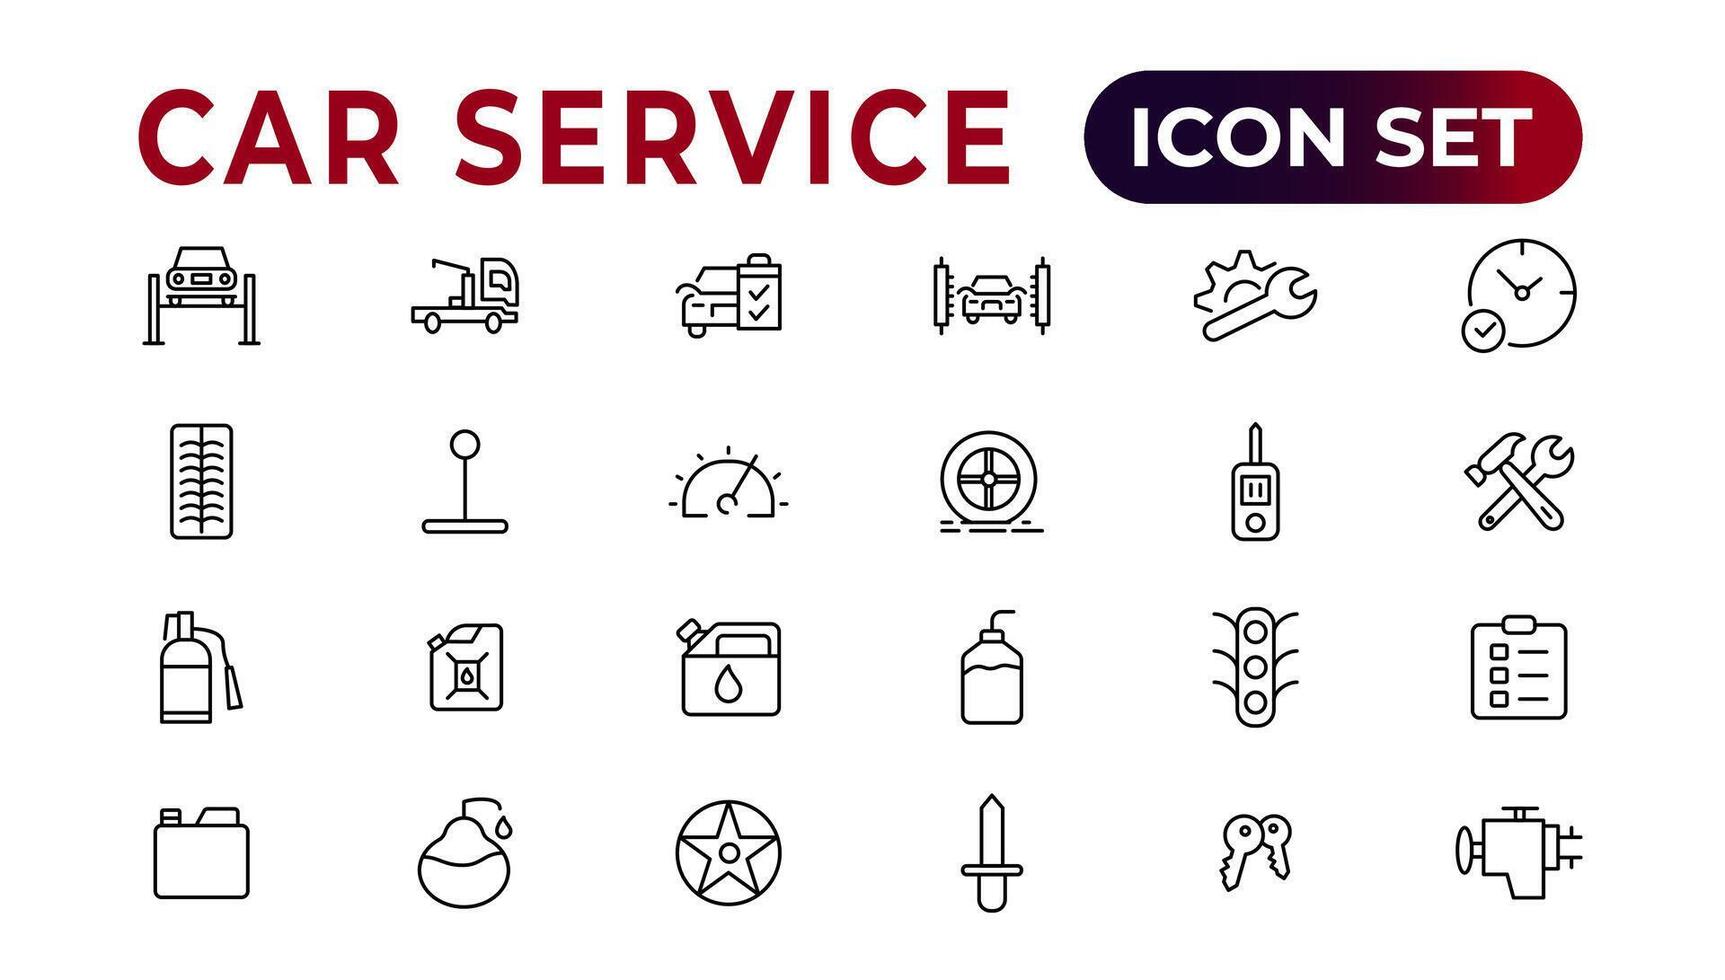 Car service icon set with editable stroke and white background. Auto service, car repair icon set. Car service and garage. vector